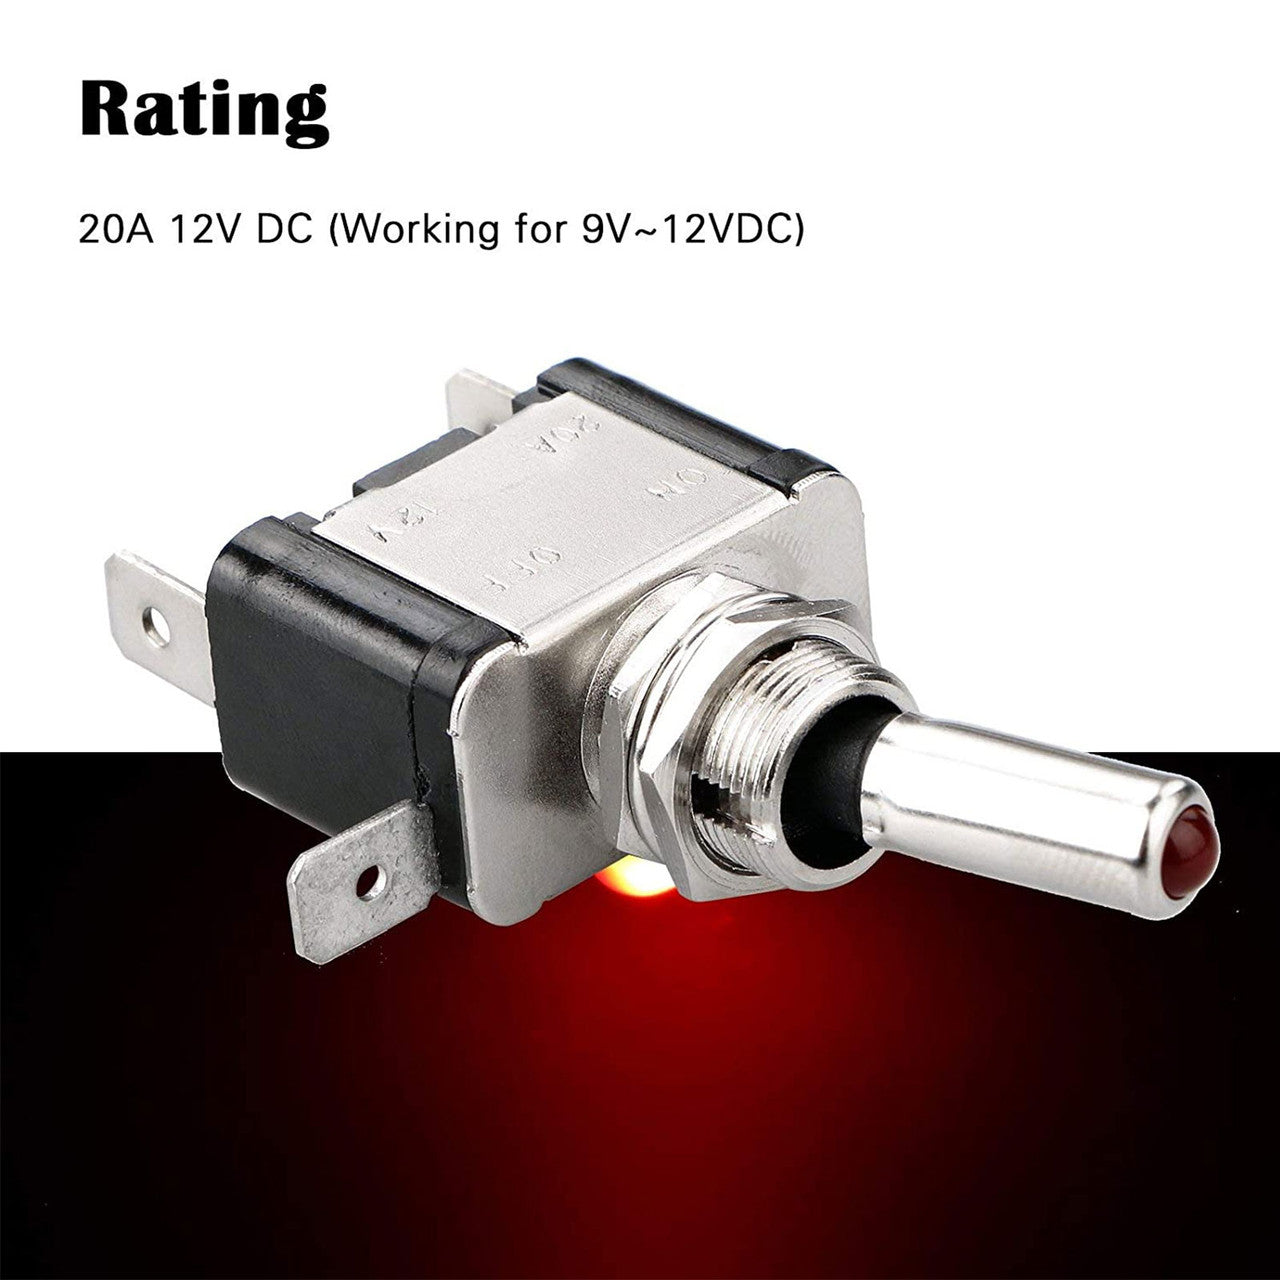 Rocker Toggle Switch, 5PCS Car LED Rocker Toggle Switch Red 12V 20A ON/Off 2Pin Replacement Universal for Cars Trucks Boats UTVs Airplanes and More